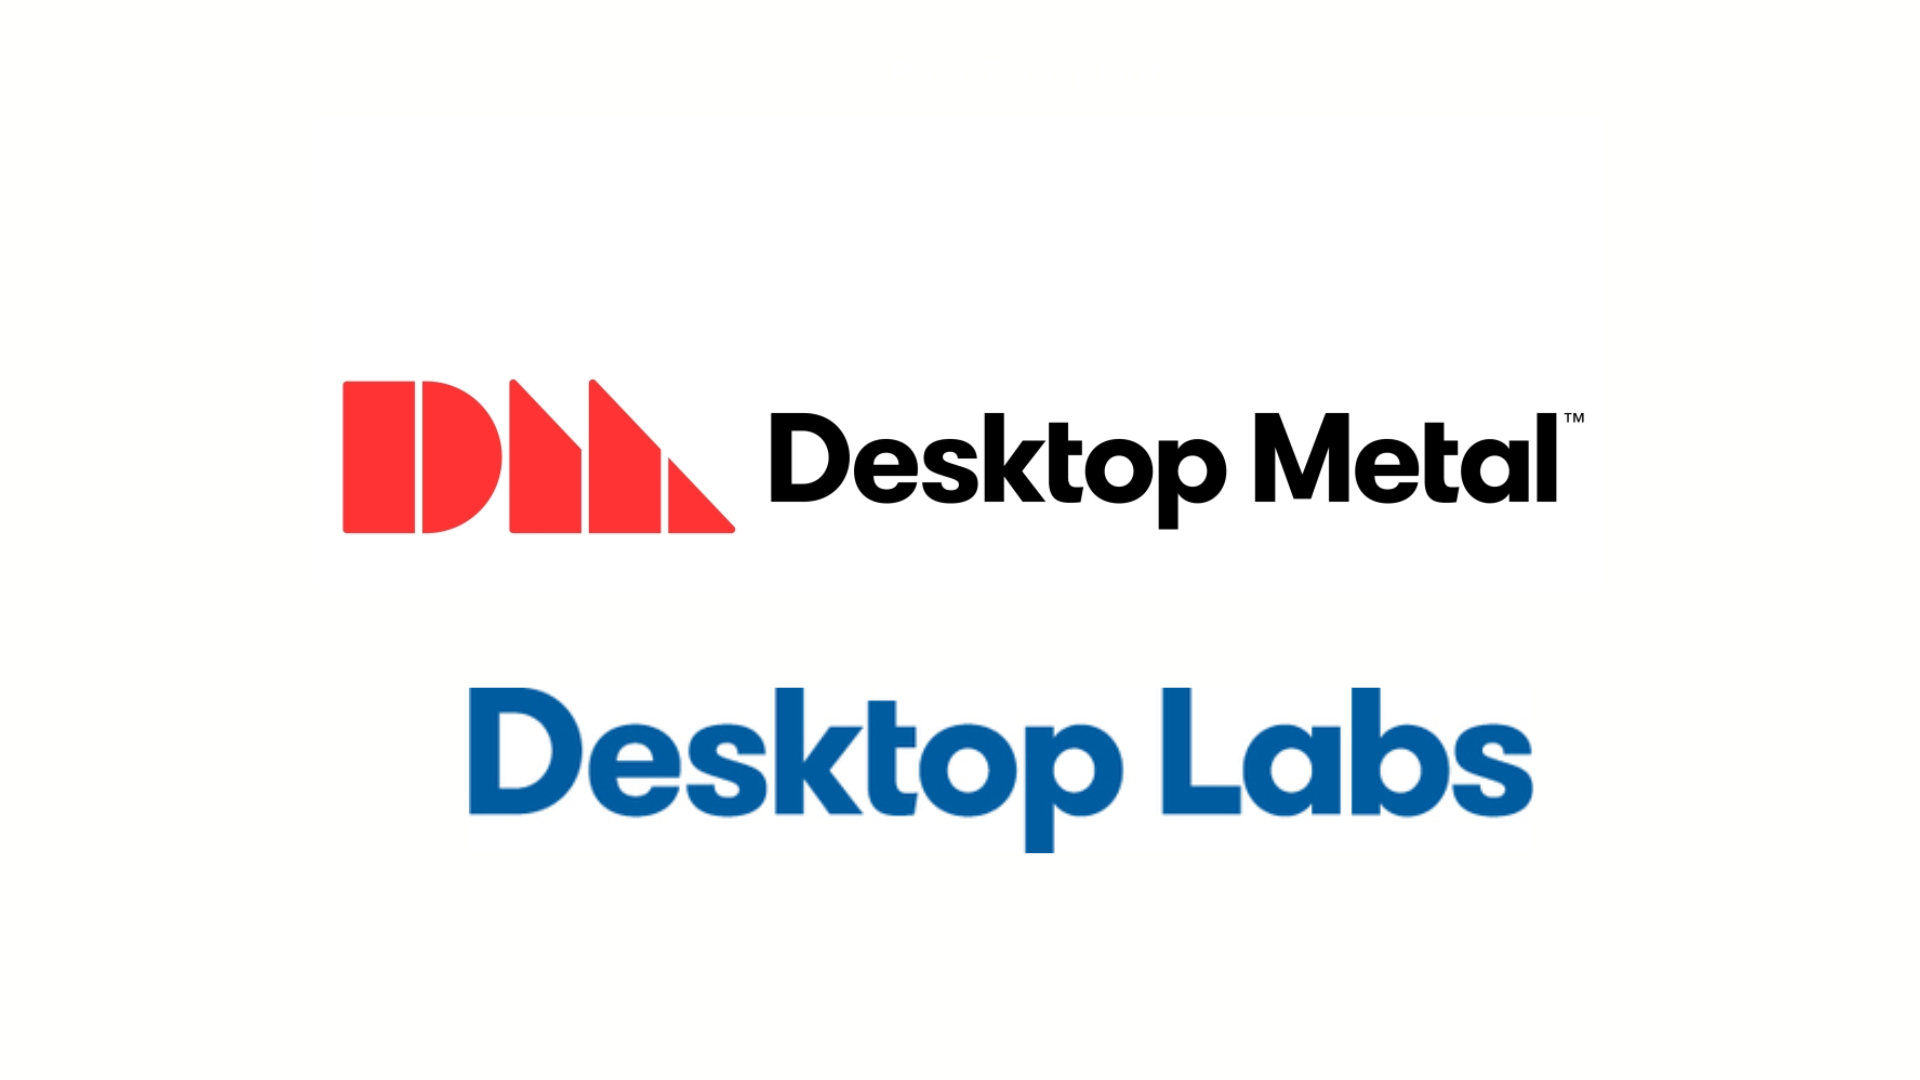 Desktop Labs, a growing network of full-service dental laboratories will use integrated digital technology to connect dental practices.